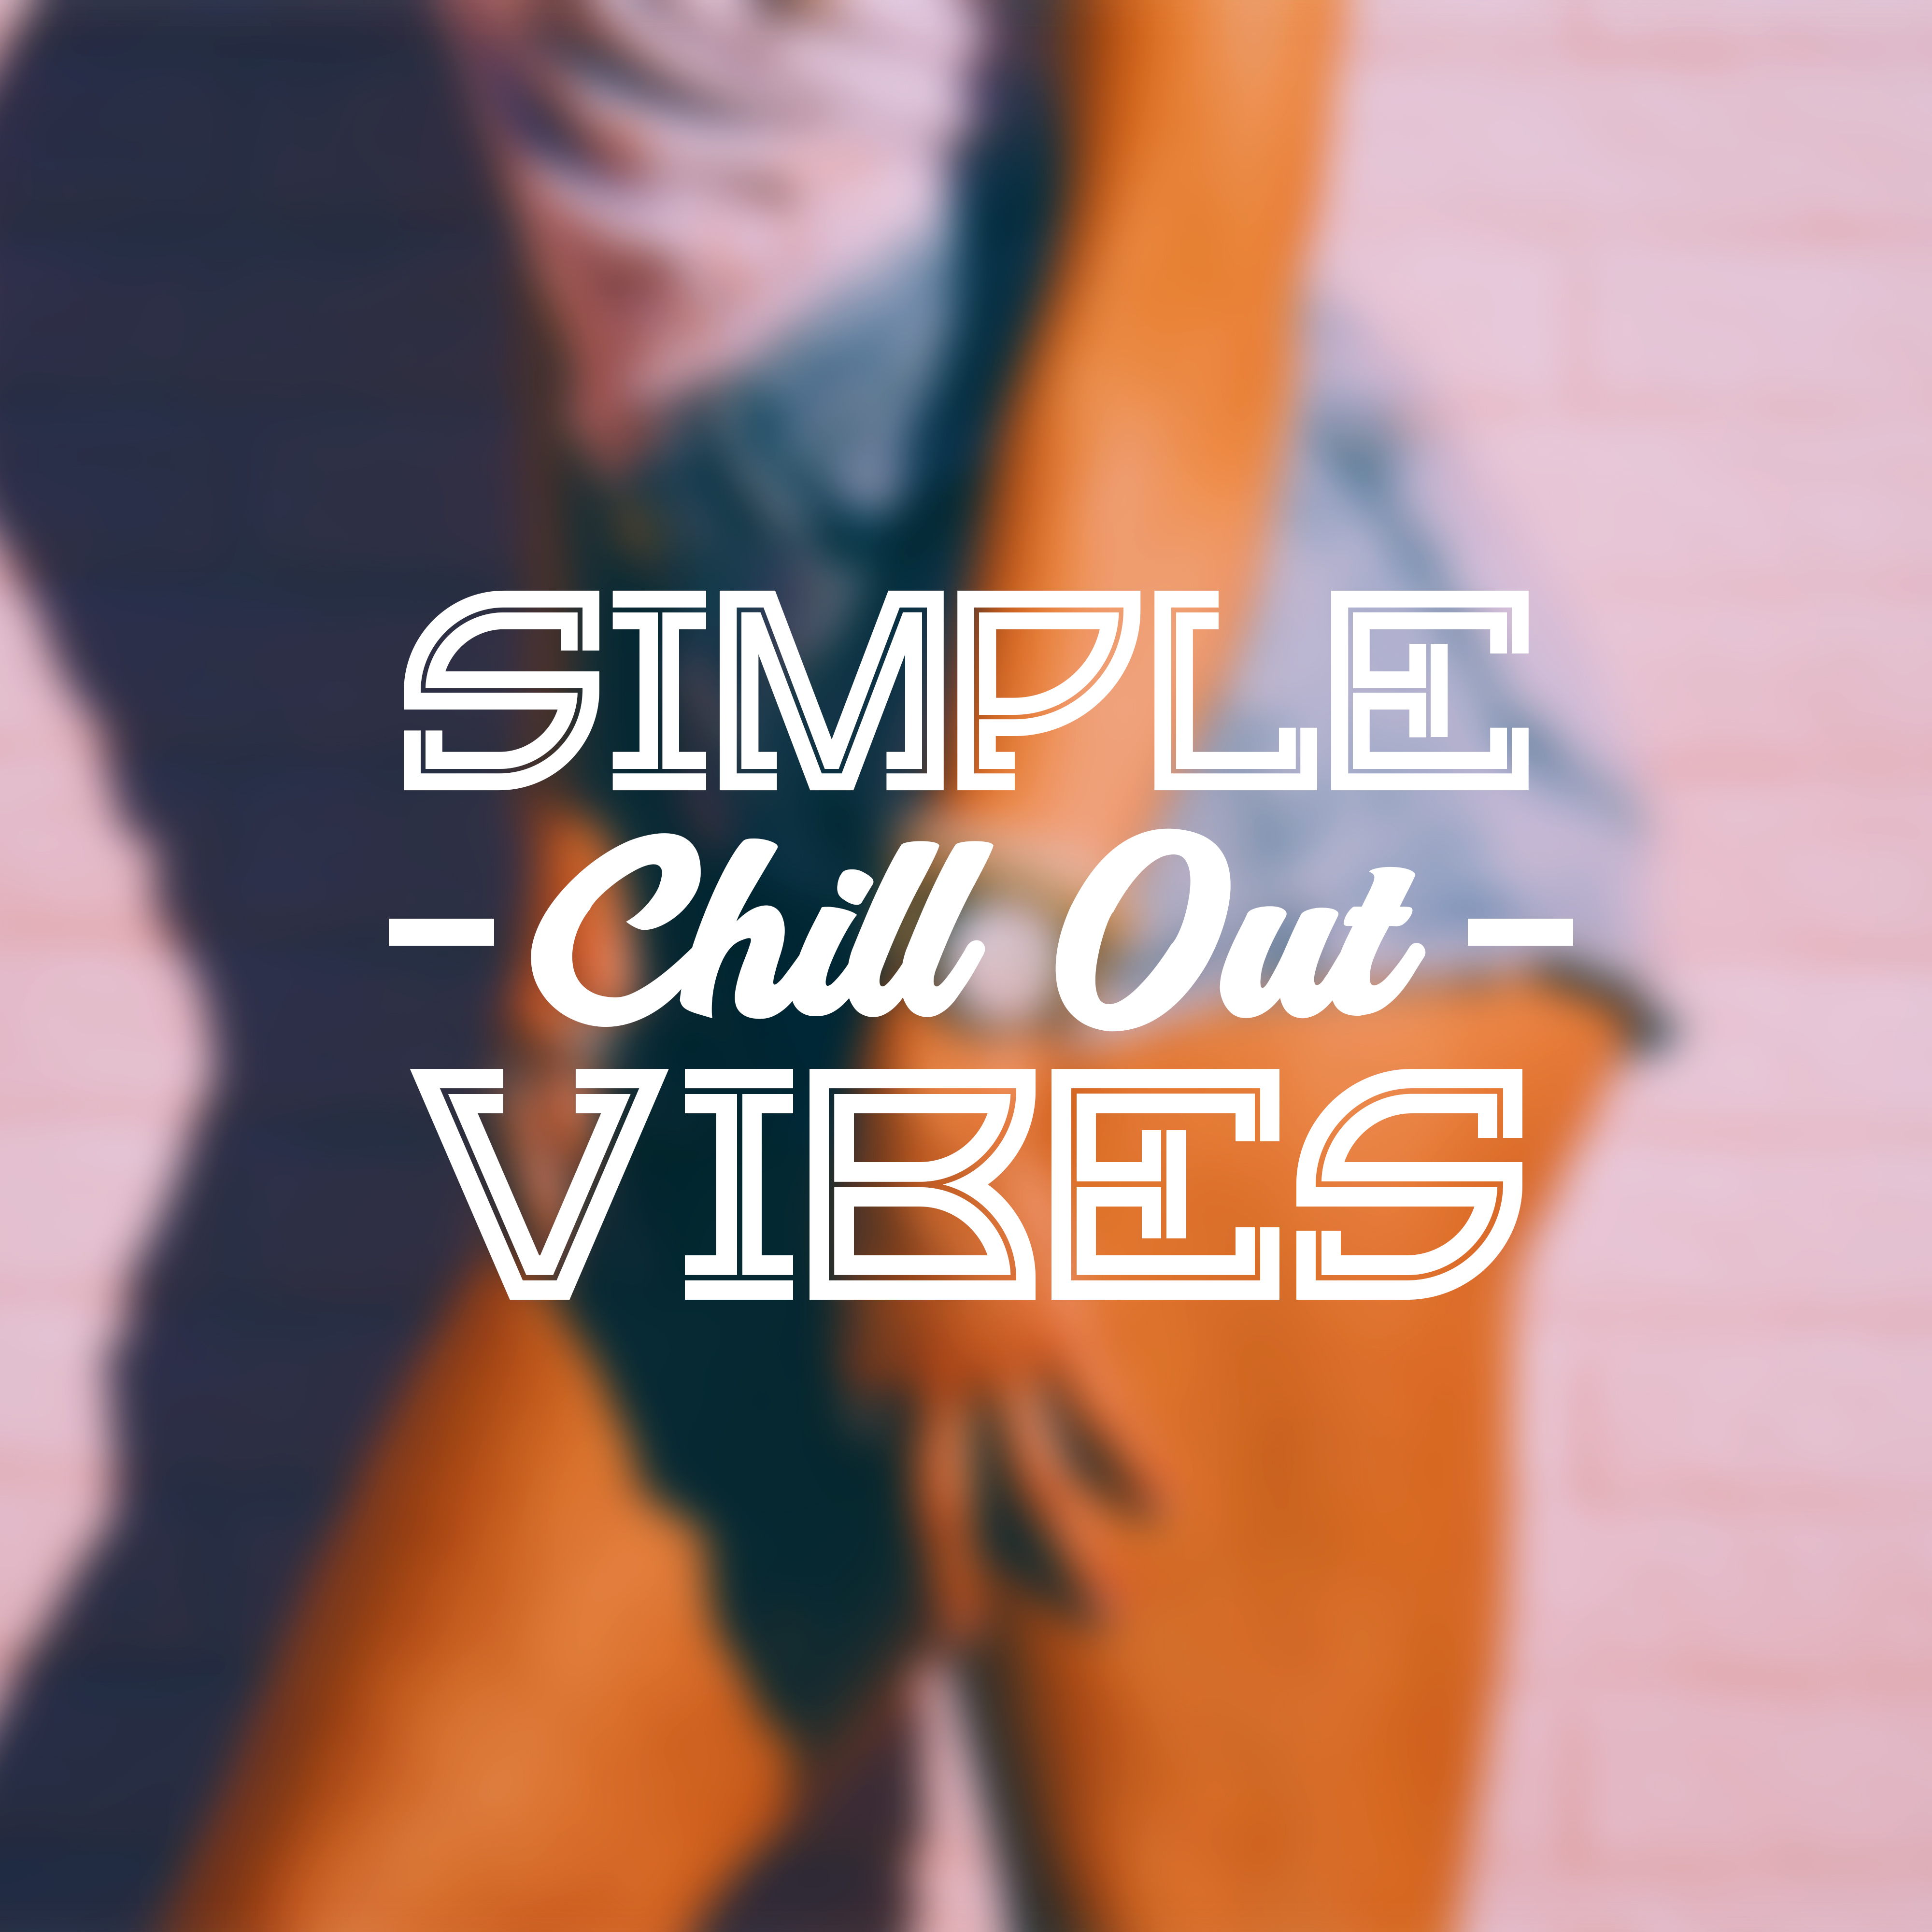 Simple Chill Out Vibes – Chill Out 2017, Future Hits, Electronic Music, Relax & Chill